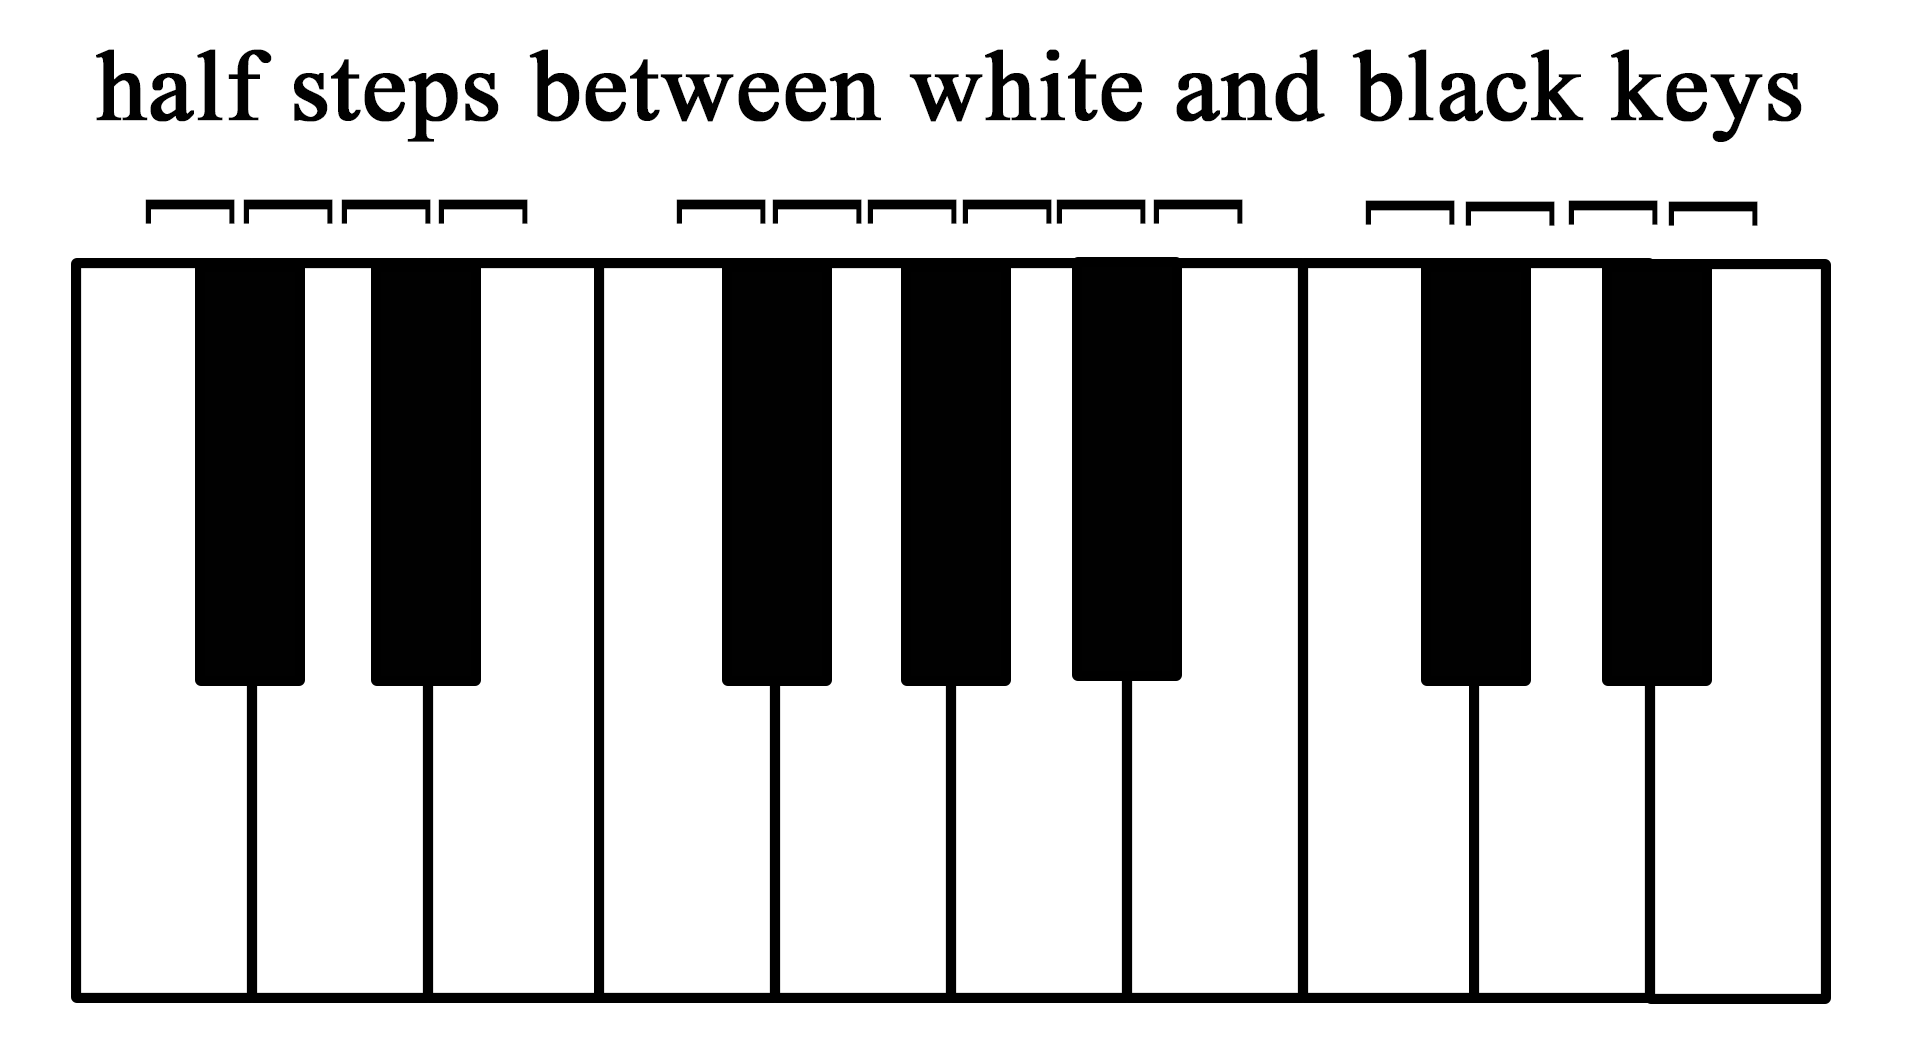 A keyboard with half steps between white and black keys labeled.